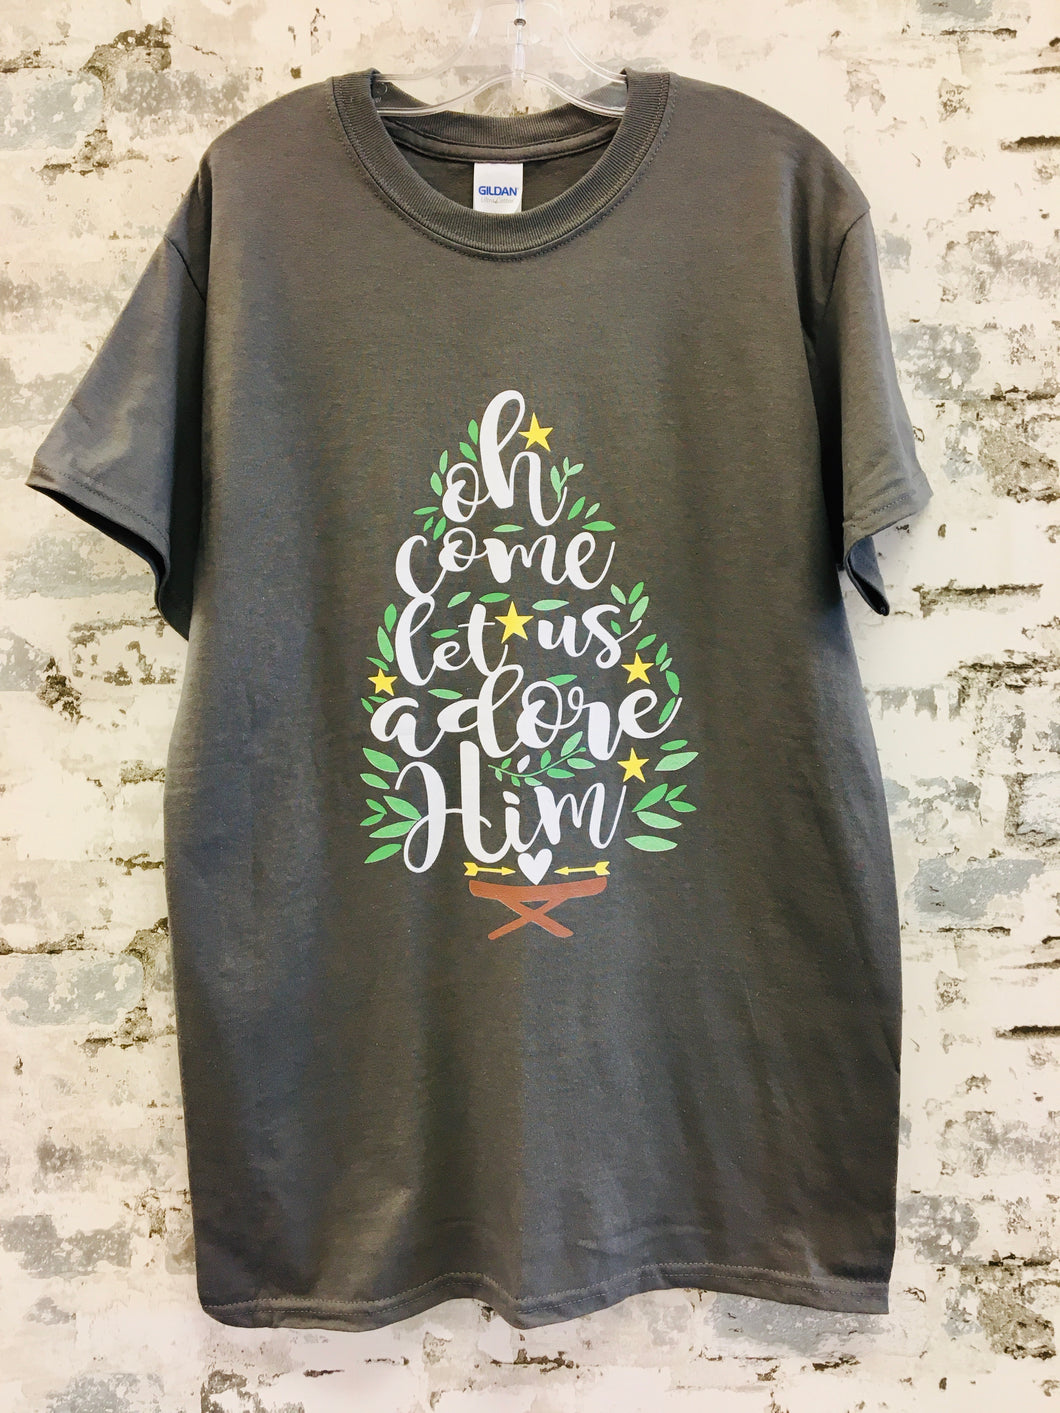 “Oh Come Let Us Adore Him” T-Shirt